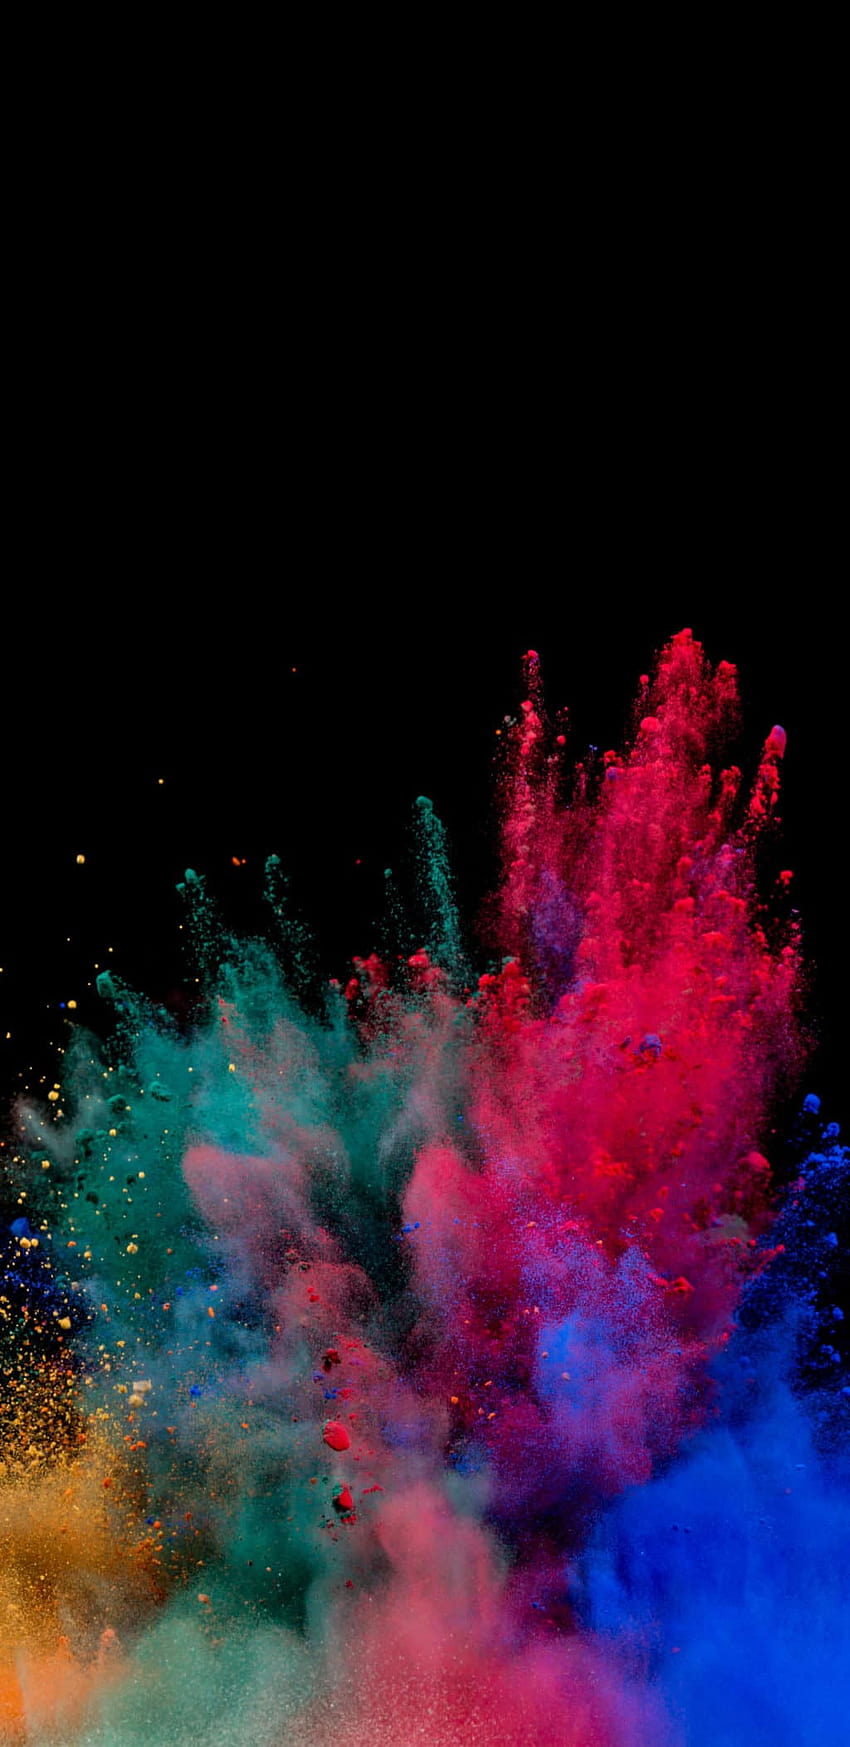 Wallpaper Samsung Galaxy S9, Android 8.0, Android Oreo, abstract, colorful,  HD, OS #20500 - Page 84